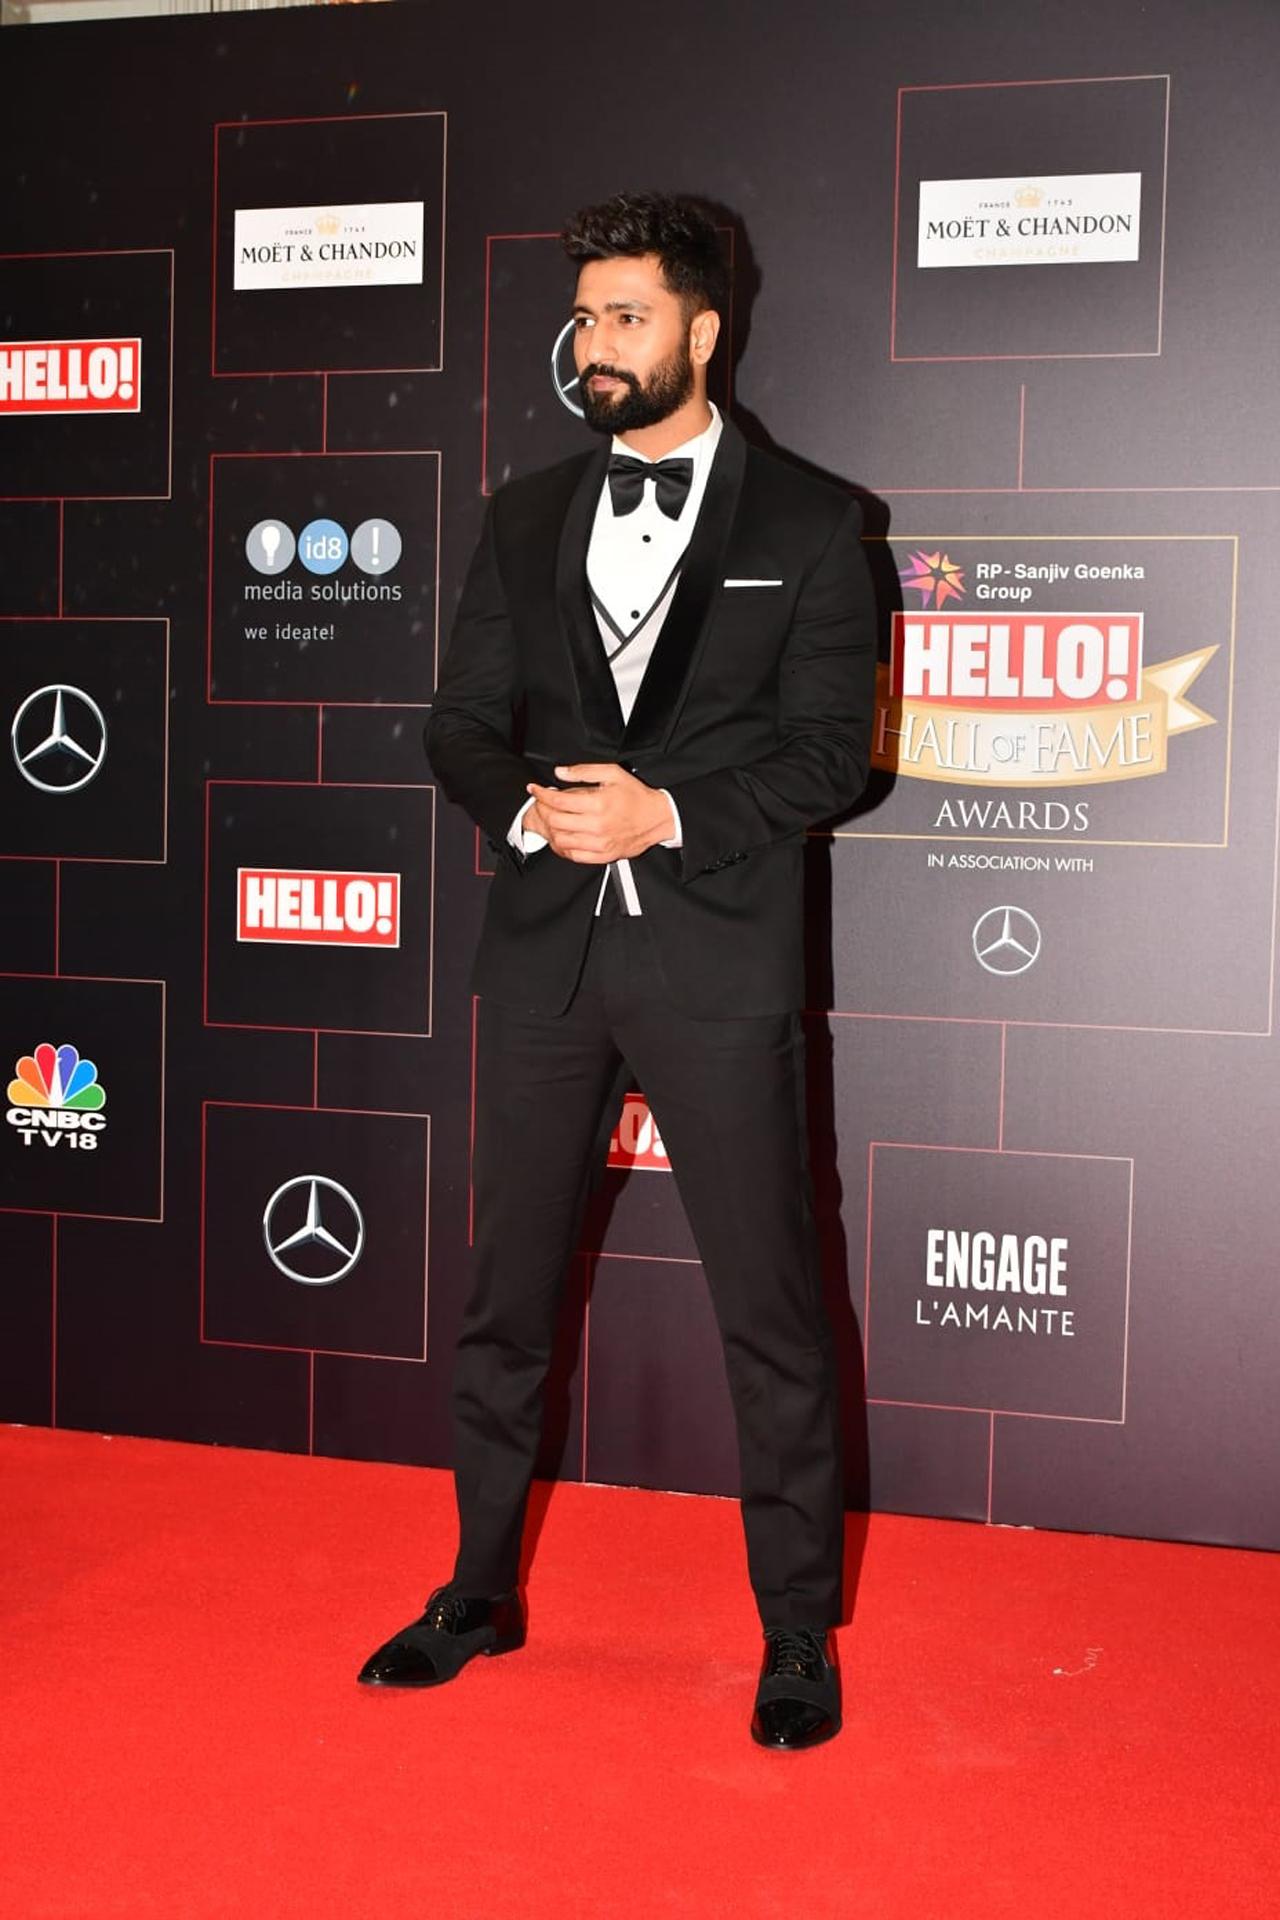 Vicky Kaushal, who also hosted the awards ceremony, opted for a black suit as he walked the red carpet event hosted in the city.